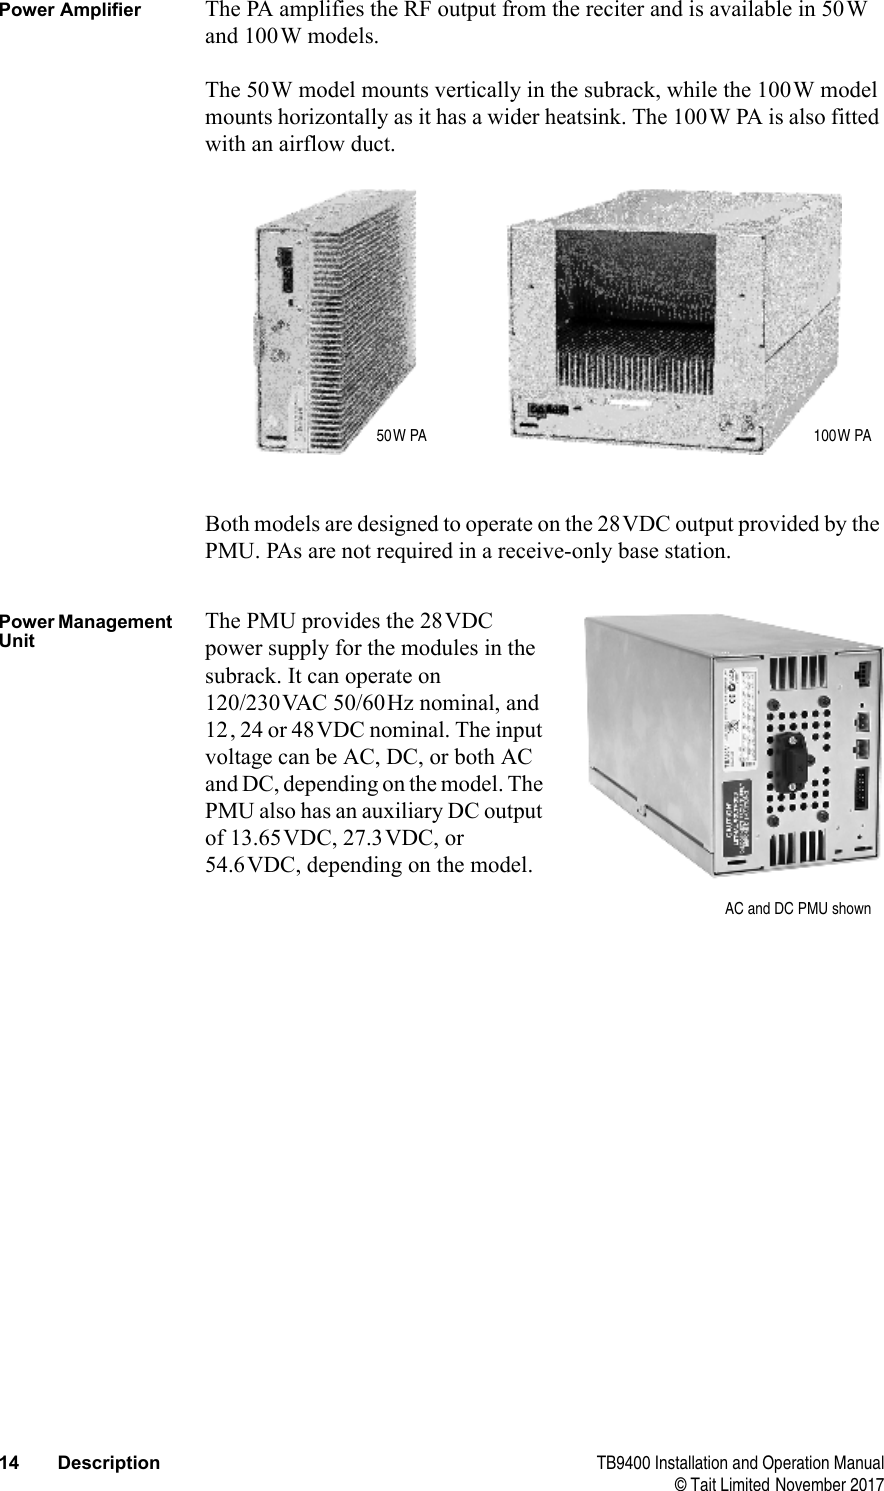  14 Description TB9400 Installation and Operation Manual© Tait Limited November 2017Power Amplifier The PA amplifies the RF output from the reciter and is available in 50W and 100W models.The 50W model mounts vertically in the subrack, while the 100W model mounts horizontally as it has a wider heatsink. The 100W PA is also fitted with an airflow duct.Both models are designed to operate on the 28VDC output provided by the PMU. PAs are not required in a receive-only base station.Power Management UnitThe PMU provides the 28VDC power supply for the modules in the subrack. It can operate on 120/230VAC 50/60Hz nominal, and 12, 24 or 48VDC nominal. The input voltage can be AC, DC, or both AC and DC, depending on the model. The PMU also has an auxiliary DC output of 13.65VDC, 27.3VDC, or 54.6VDC, depending on the model.50W PA 100W PAAC and DC PMU shown